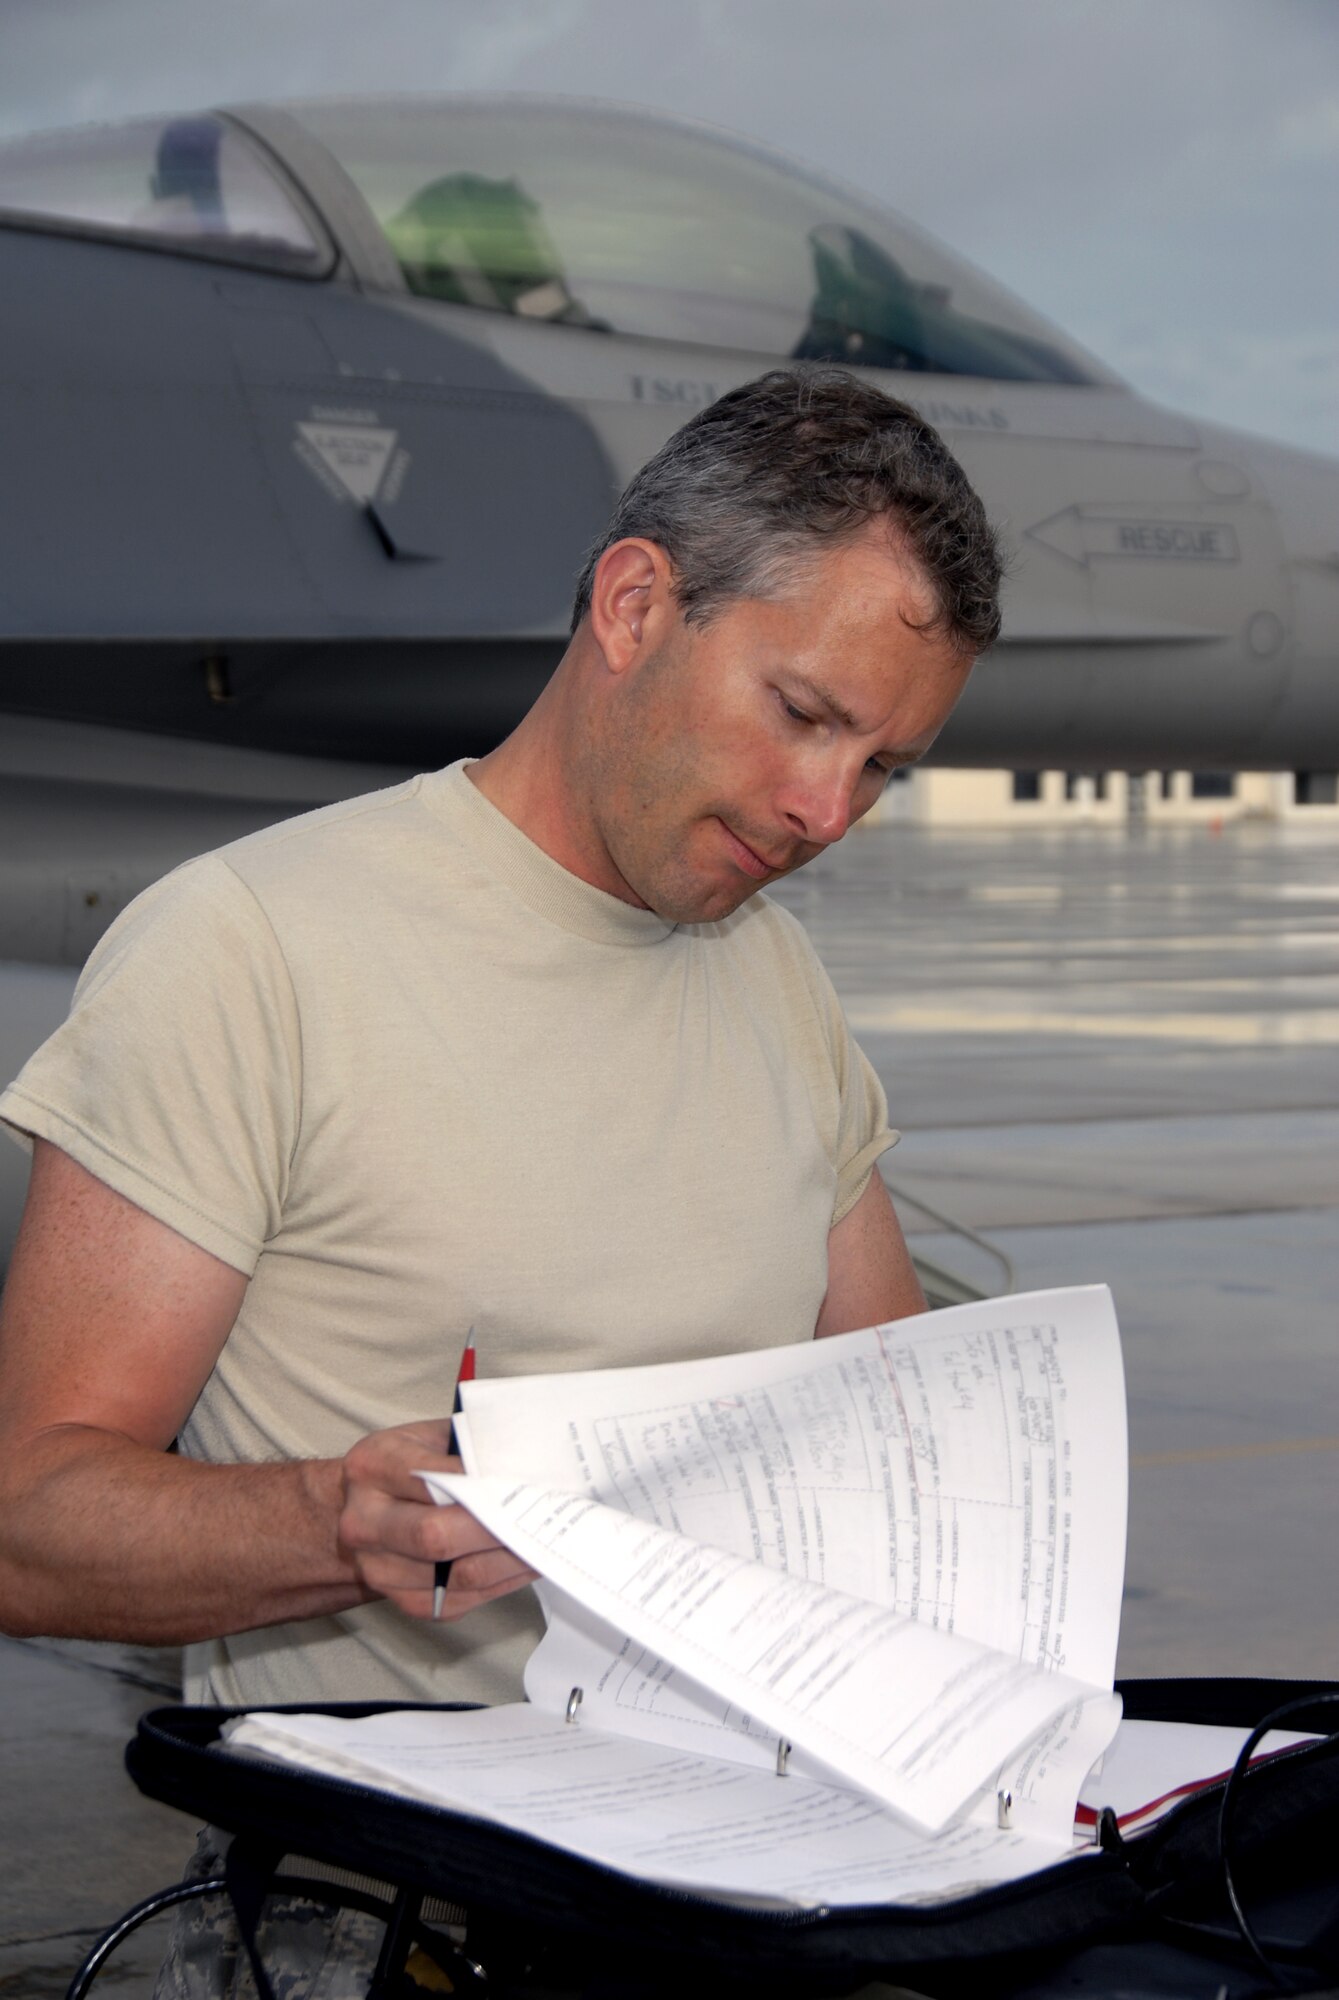 Technical Sgt. Mike Hall, a crew chief with the 115th Fighter Wing, Madison, Wis., documents completed checklist items while preparing one of the units F-16C Fighting Falcons for launch April 30, 2009.  The 115th FW participated in an air-to-air combat skills training exercise April 18 - May 2, 2009 along side their naval counterparts from Strike Fighter Squadron 2 (VFA-2), Naval Air Station Lemoore, Calif., while deployed to Naval Air Station Key West, Fla.  The training missions featured air-to-air and air-to-ground offensive and defensive combat tactics designed to simulate real-world operations.  (U.S. Air Force photo by: Master Sgt. Dan Richardson)